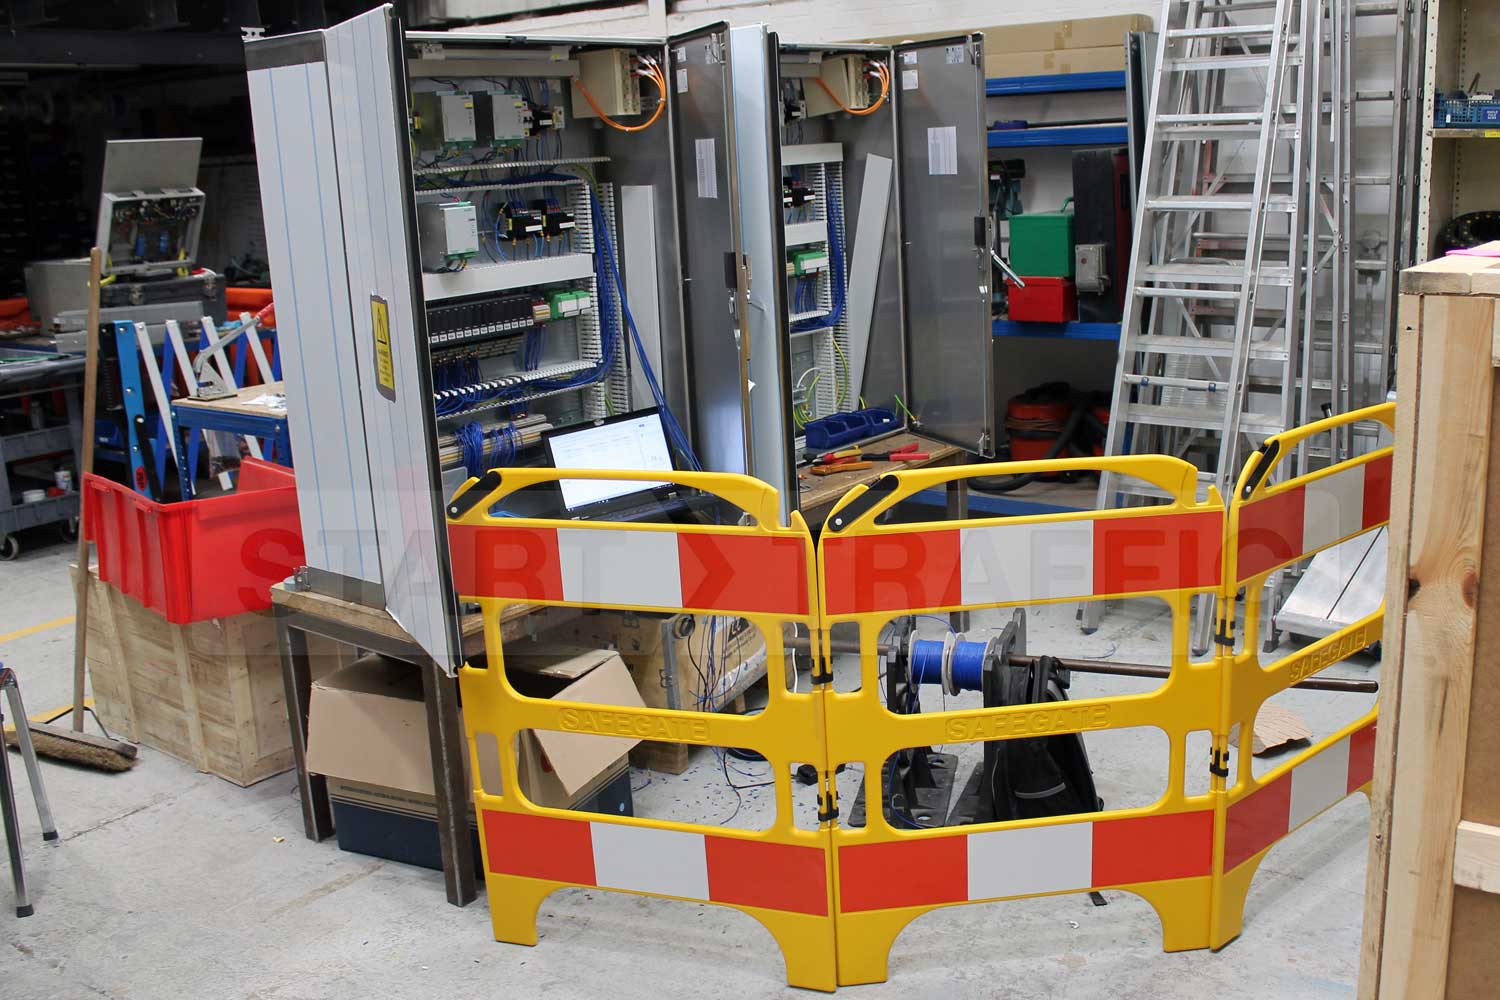 Three Gate Yellow Barrier in use with Electrical installations